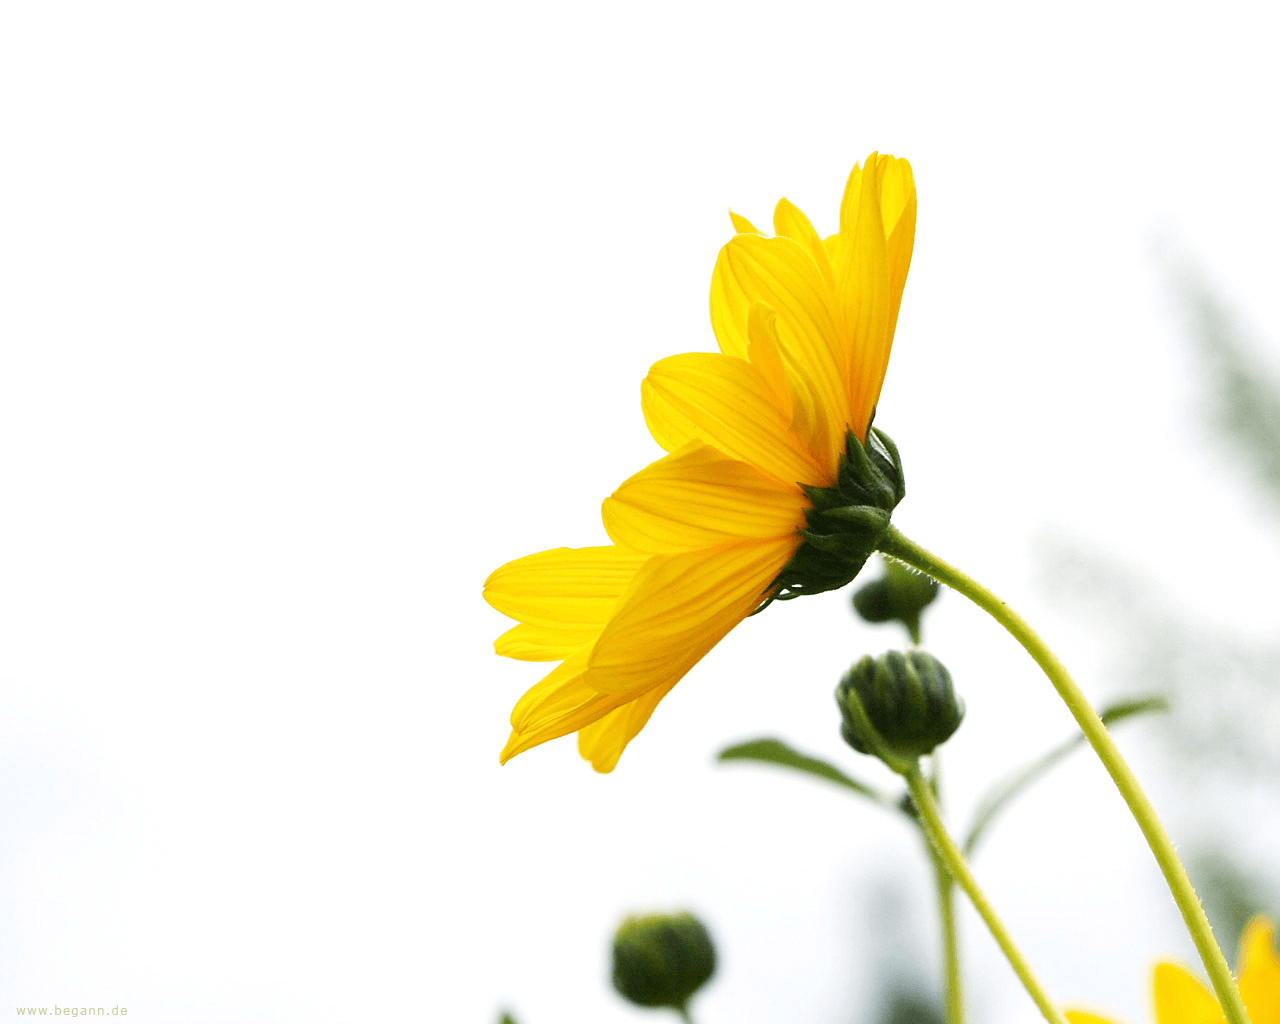 Yellow Flower on White Background